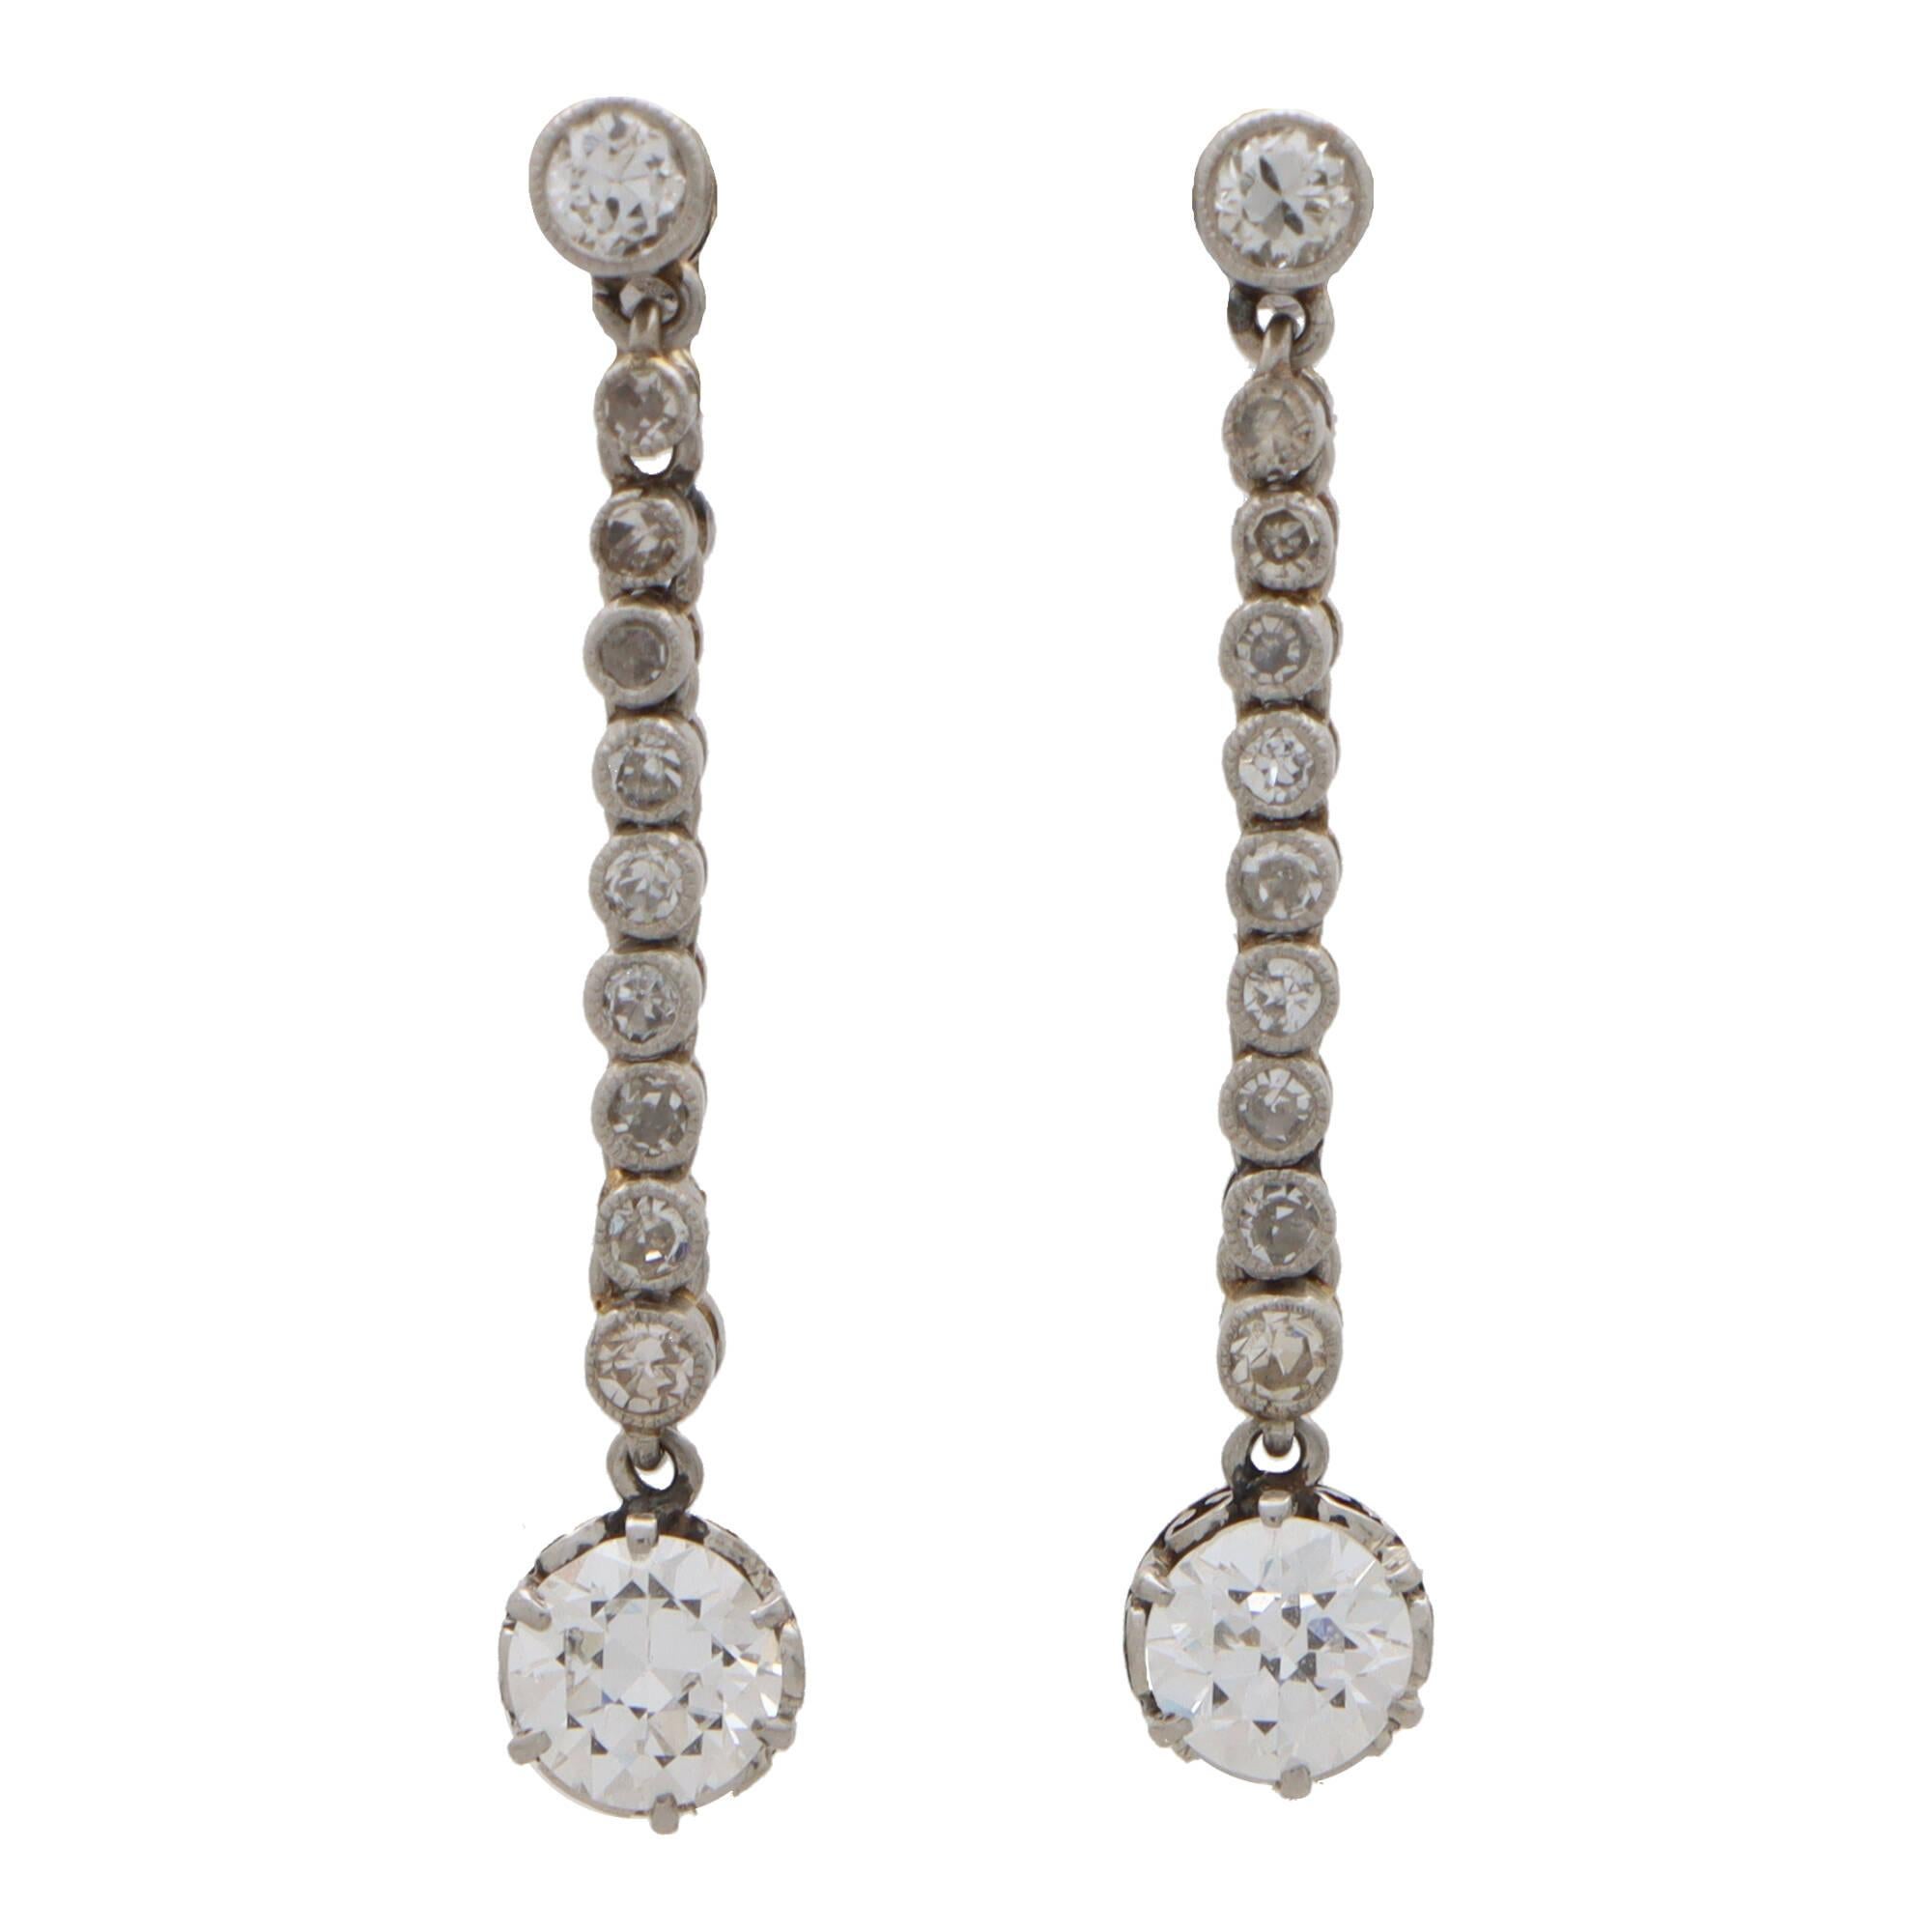  Art Deco Old Cut Diamond Drop Earrings Set in Platinum In Excellent Condition For Sale In London, GB